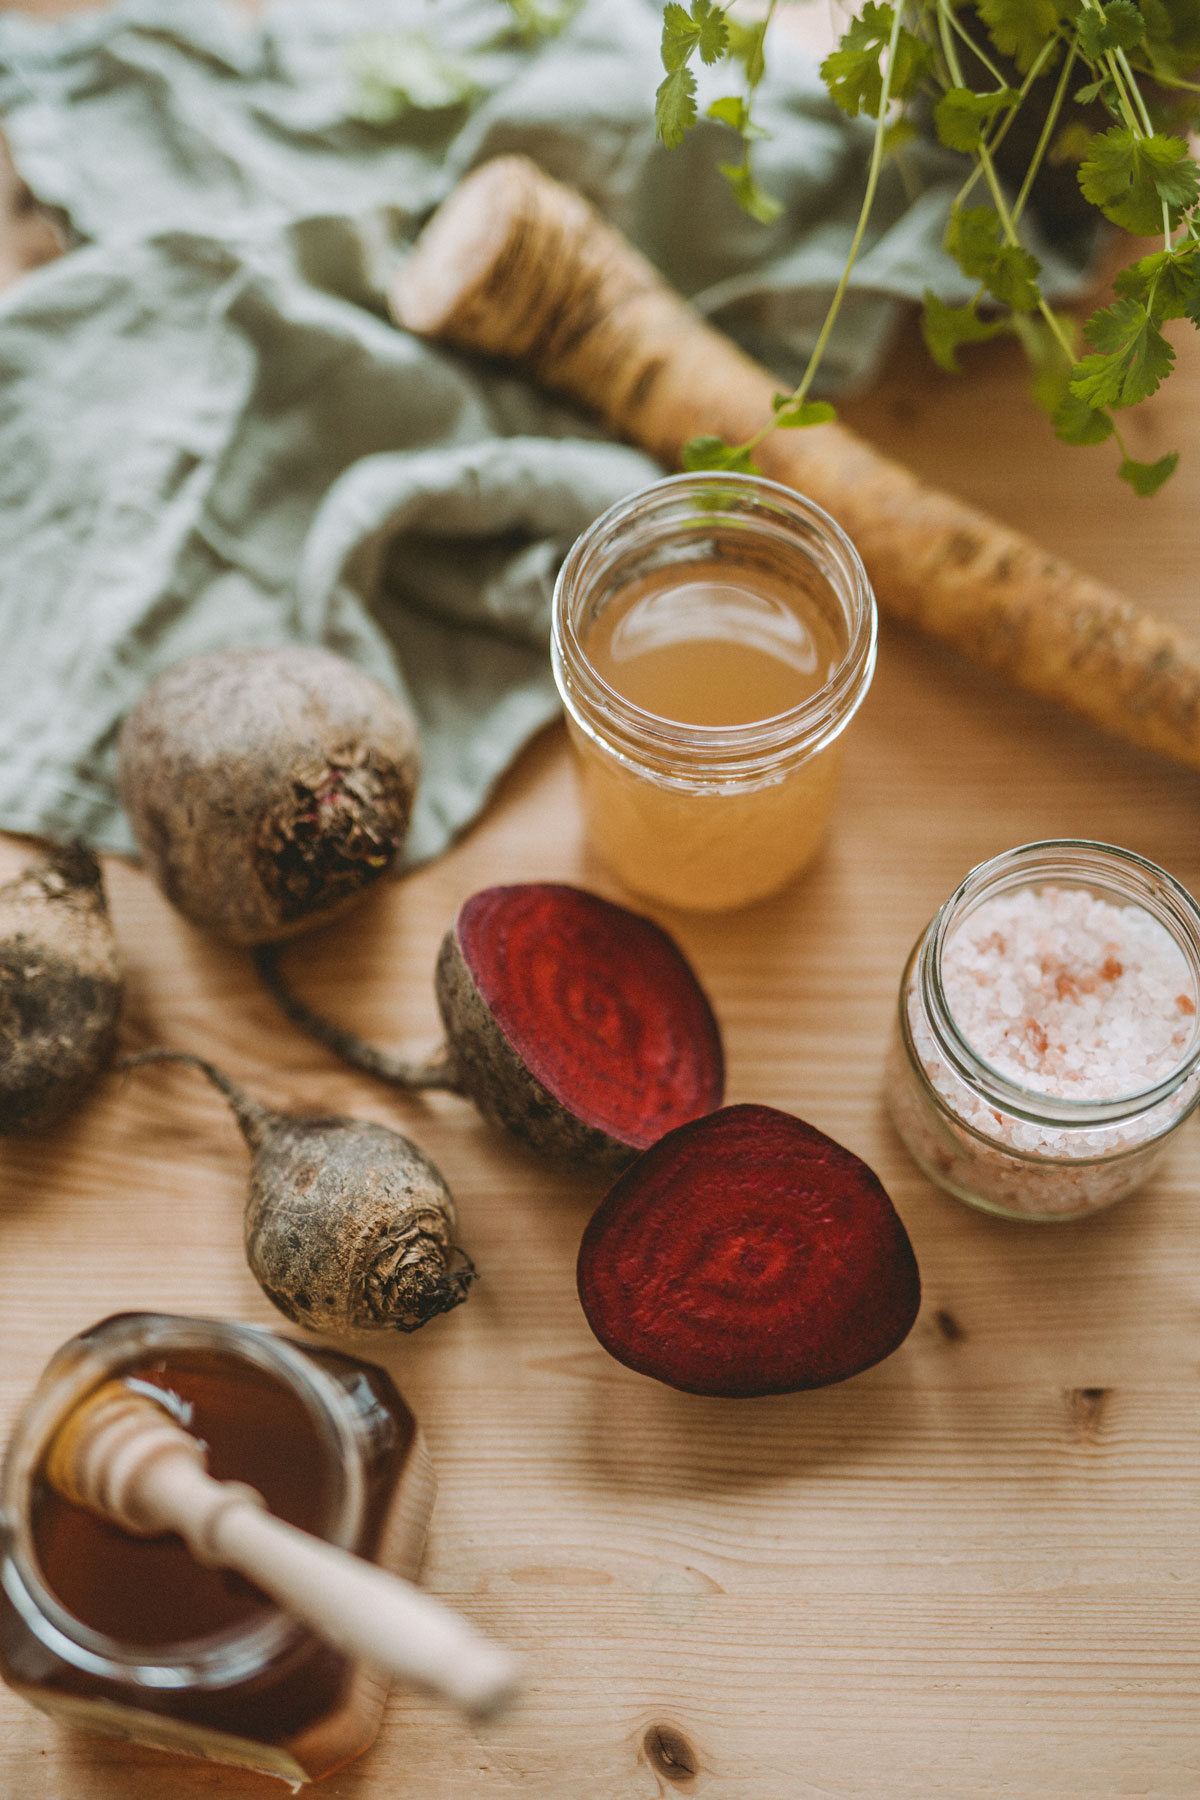 Ingredients for a fresh horseradish recipe with beets 